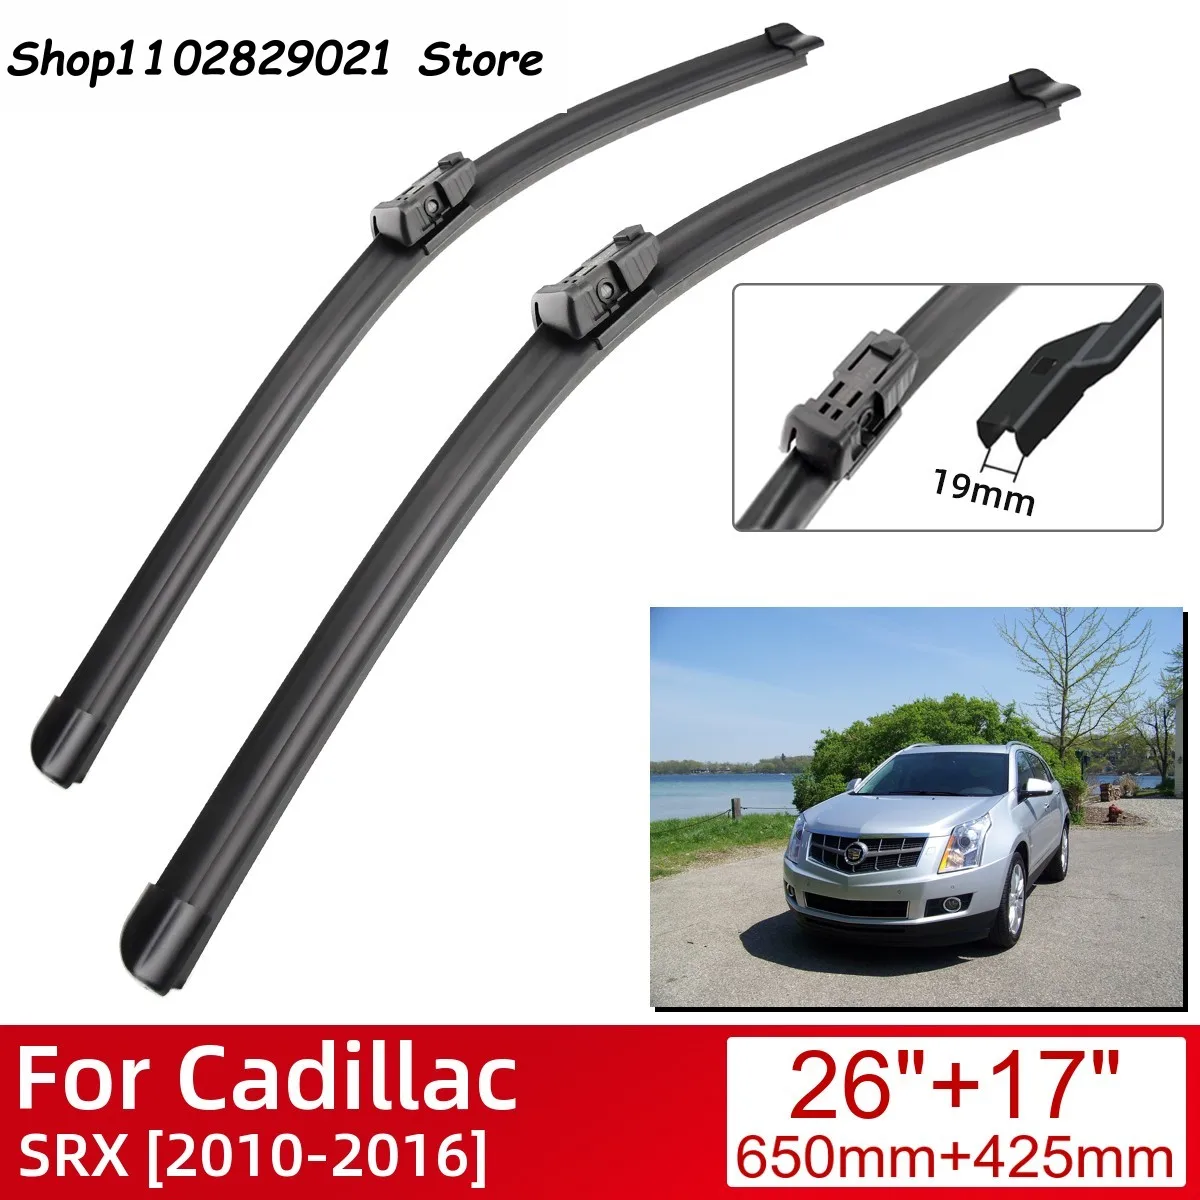 

For Cadillac SRX 2010-2016 Car Accessories Front Windscreen Wiper Blade Brushes Wipers 2016 2015 2014 2013 2012